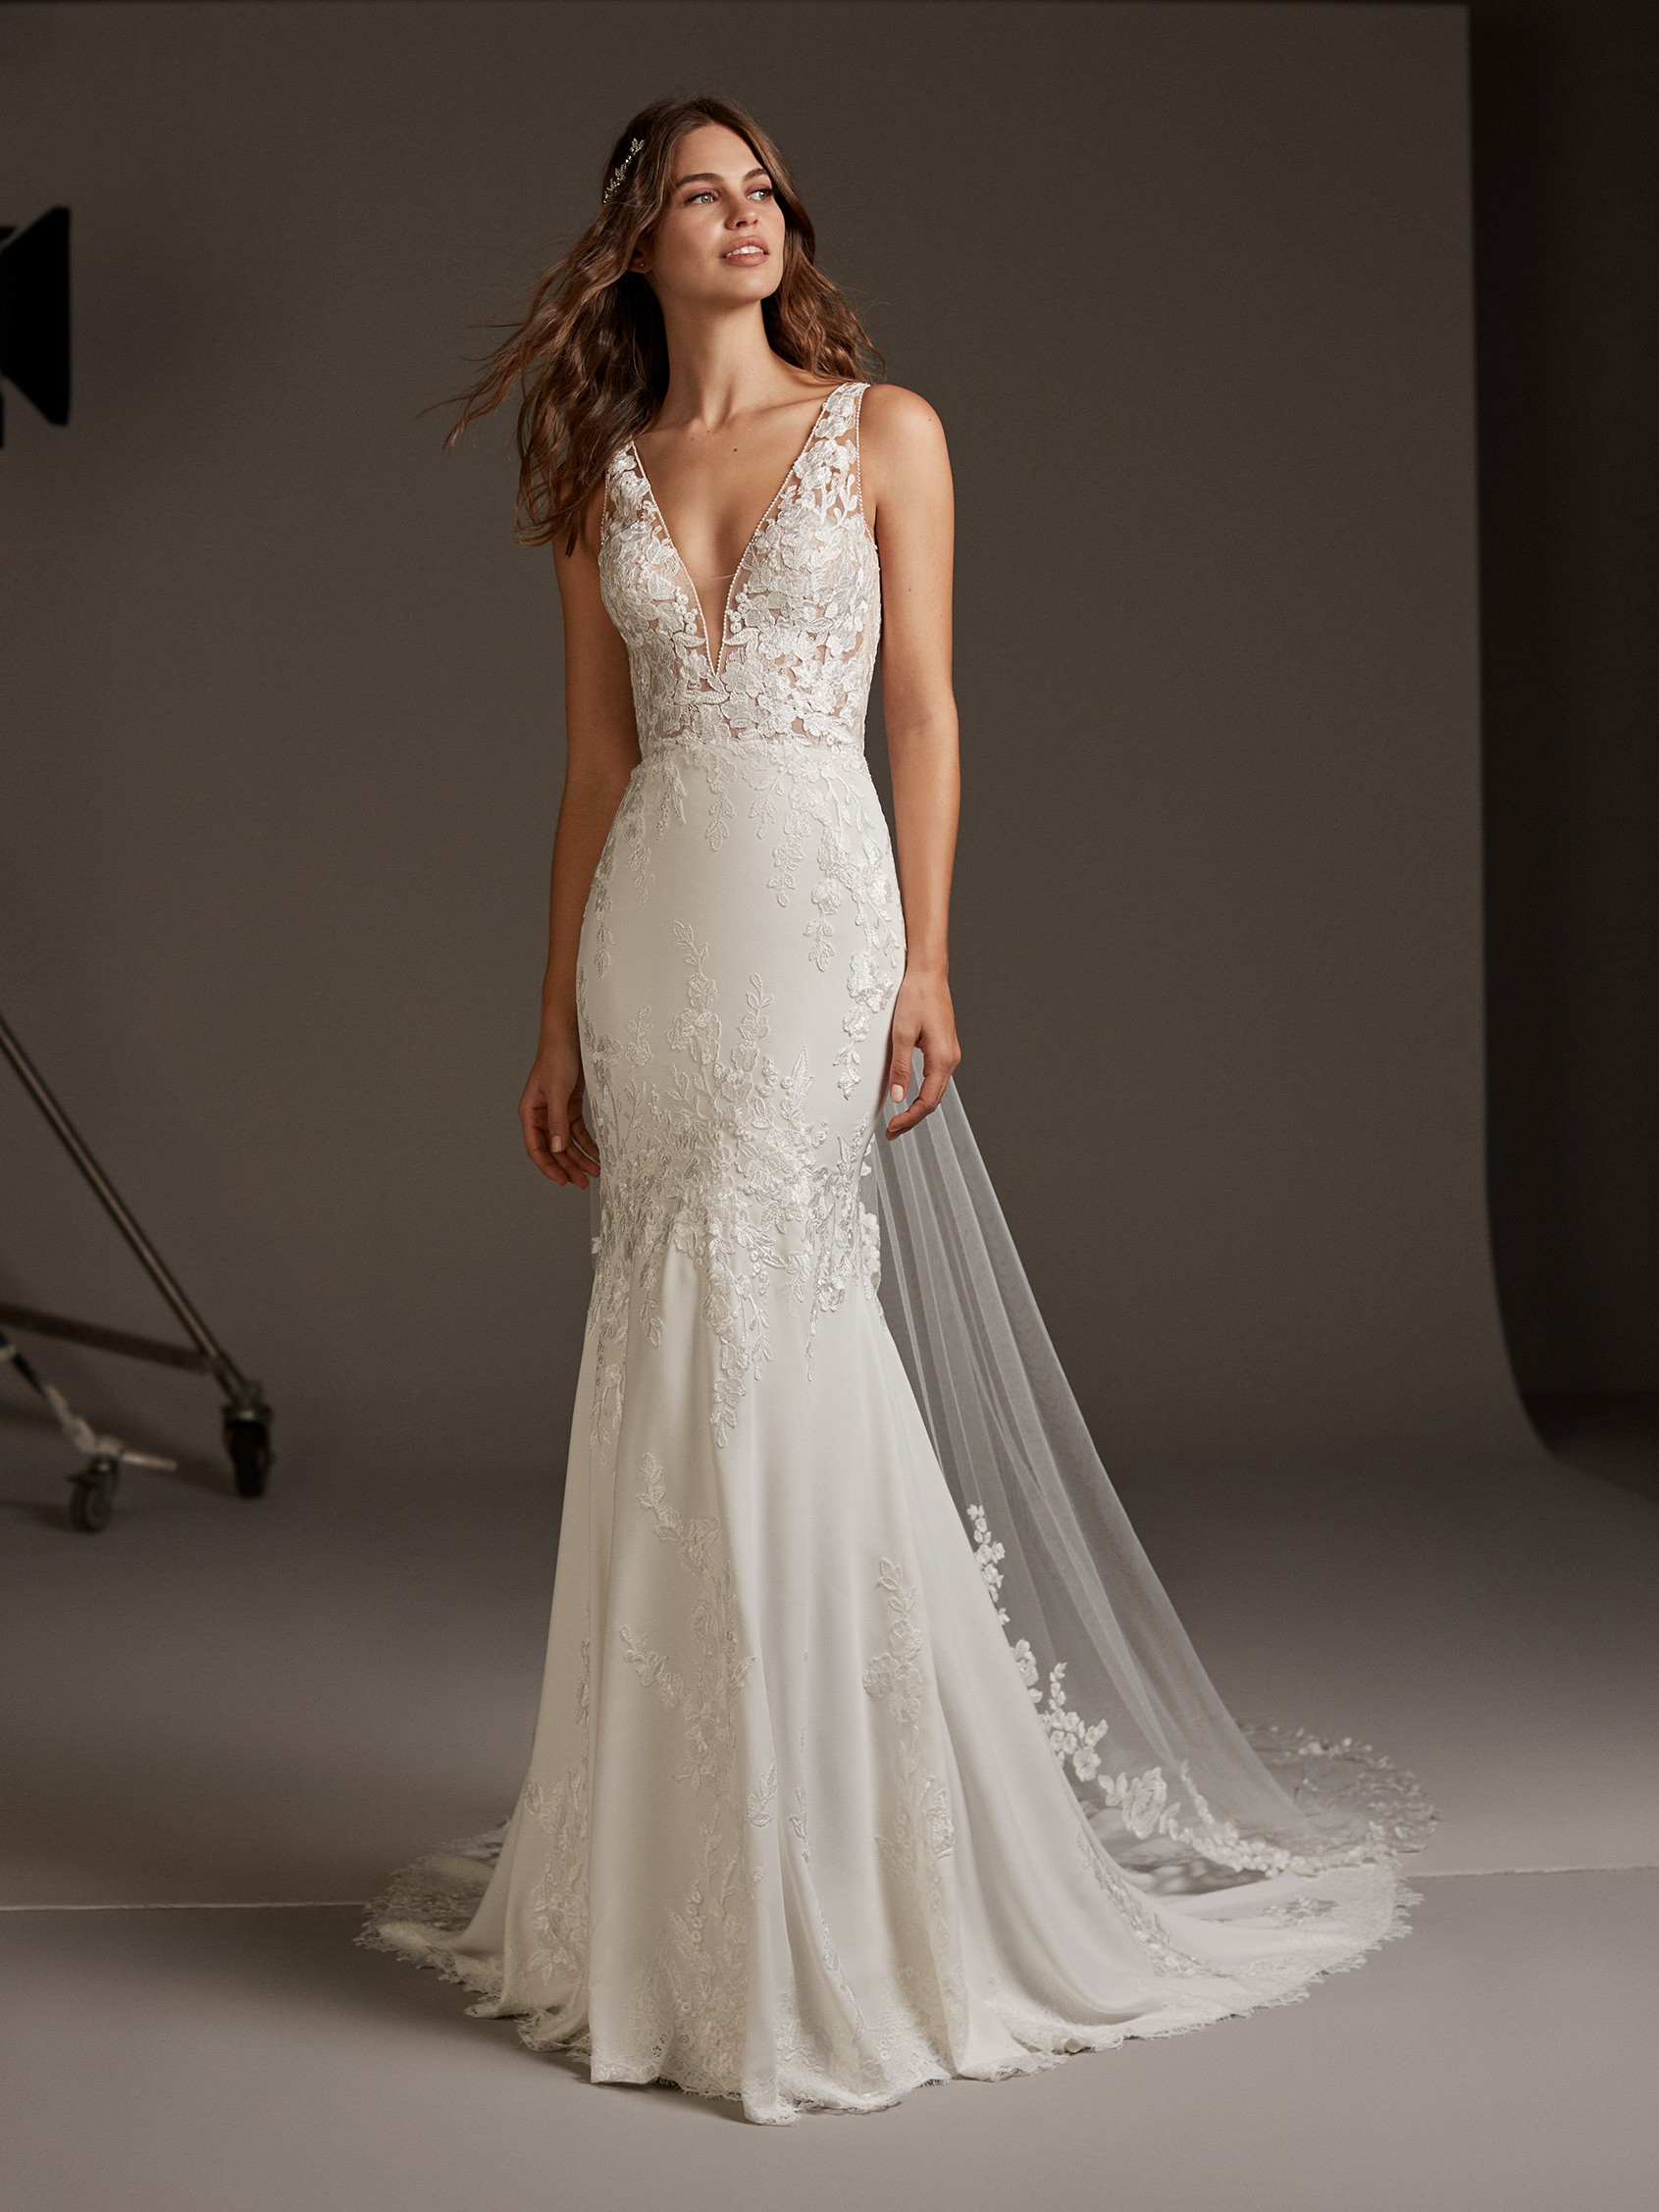 Pronovias | Gowns of Grace - Alcyone | Gowns of Grace